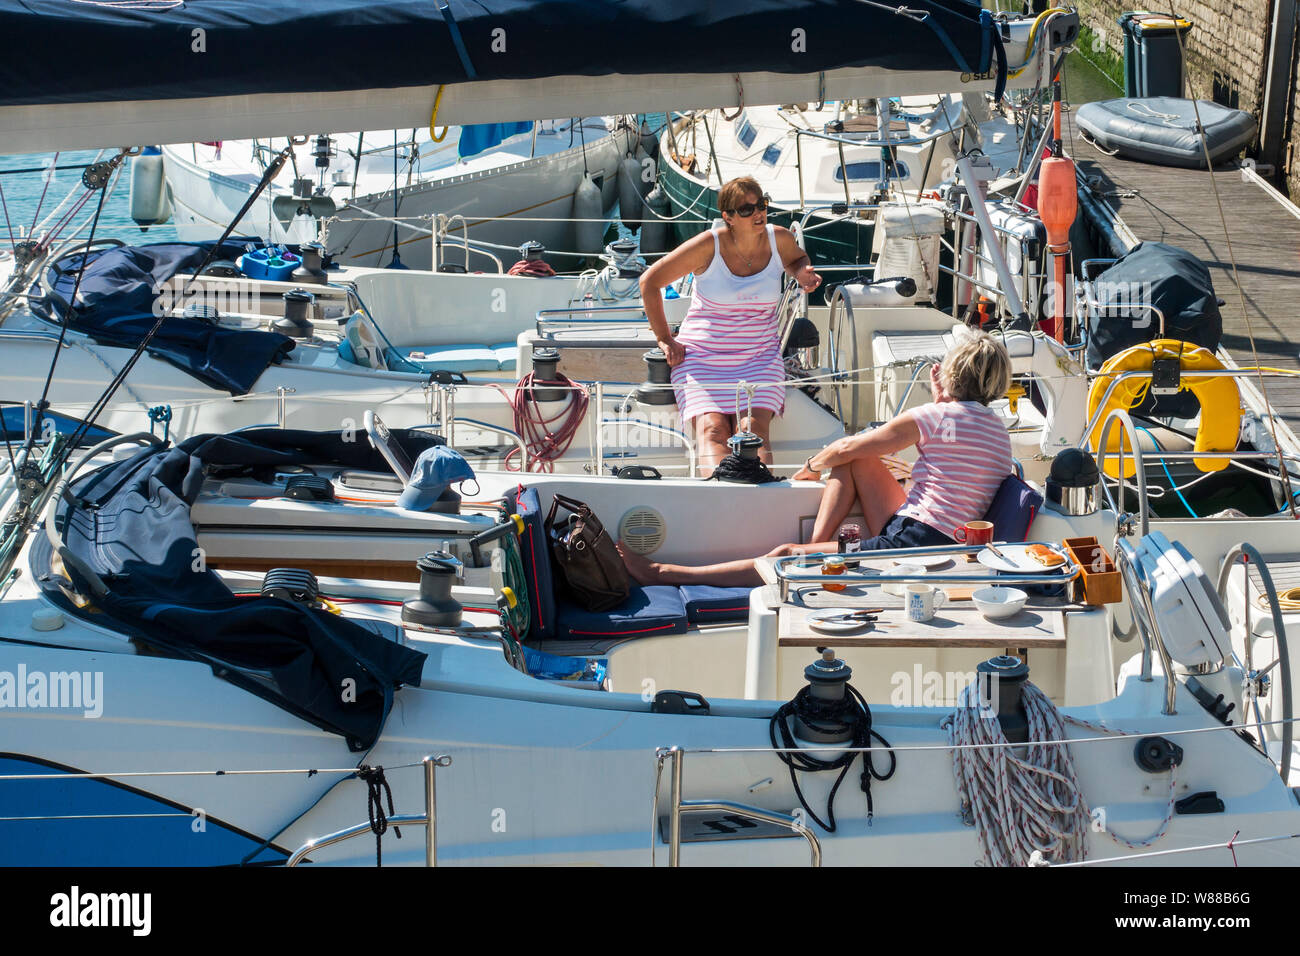 Wealthy women chatting after breakfast on board of their neighbouring yachts / sailing boats docked / moored in marina / yacht basin / port in summer Stock Photo